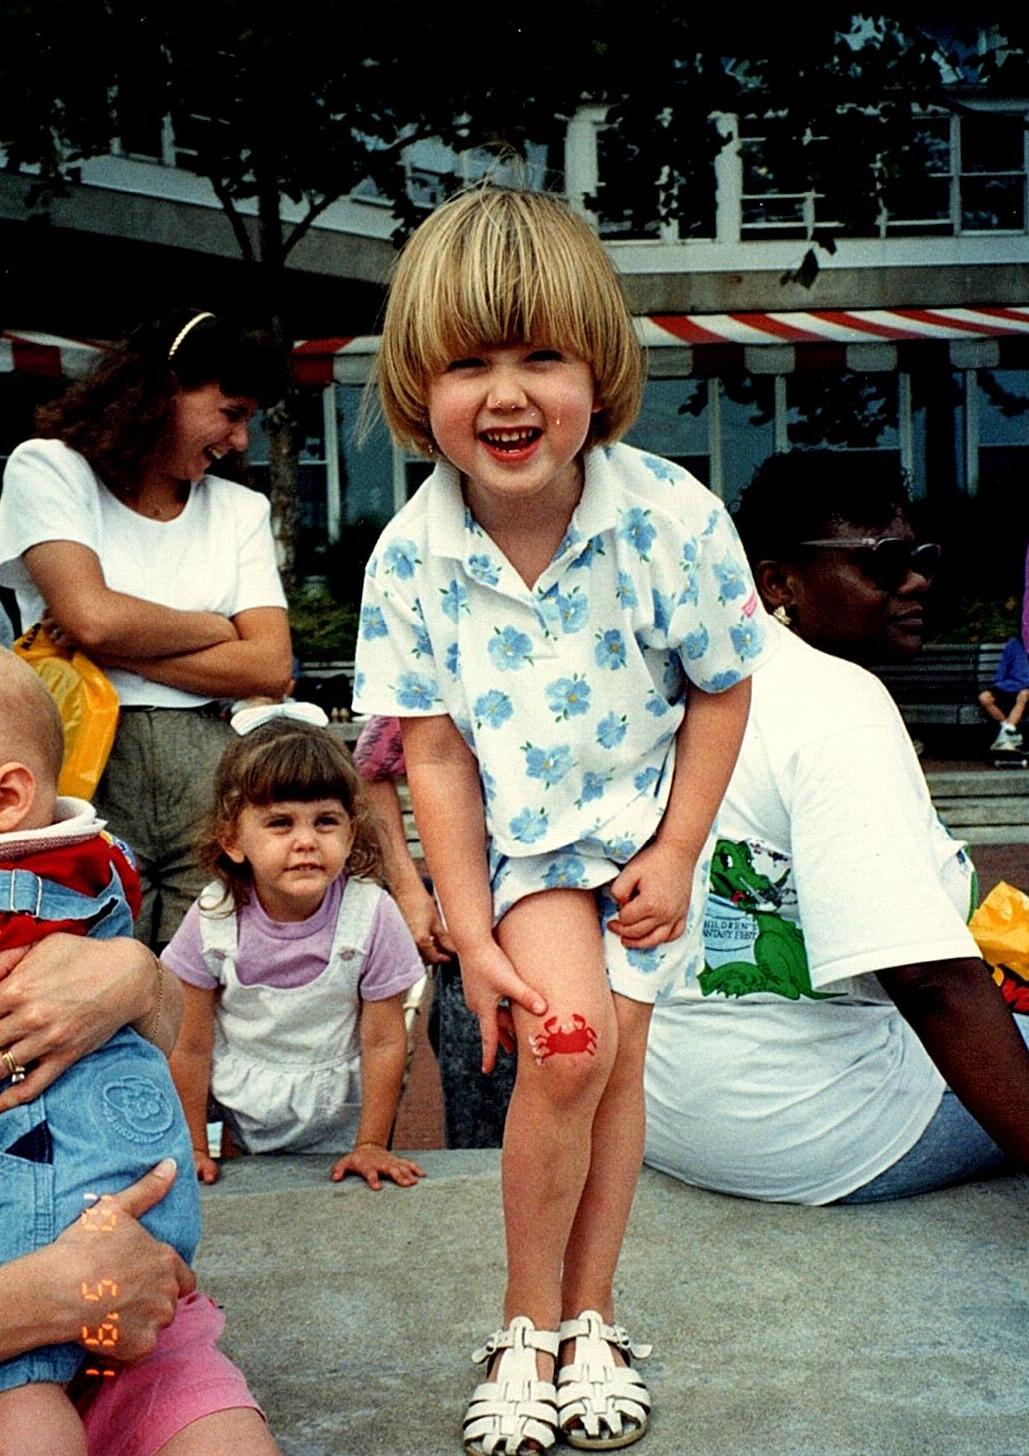 Clinical Director of Occupational Therapy, Occupational Therapist Brooke Brees as a young girl wearing a white polo with blue patterns